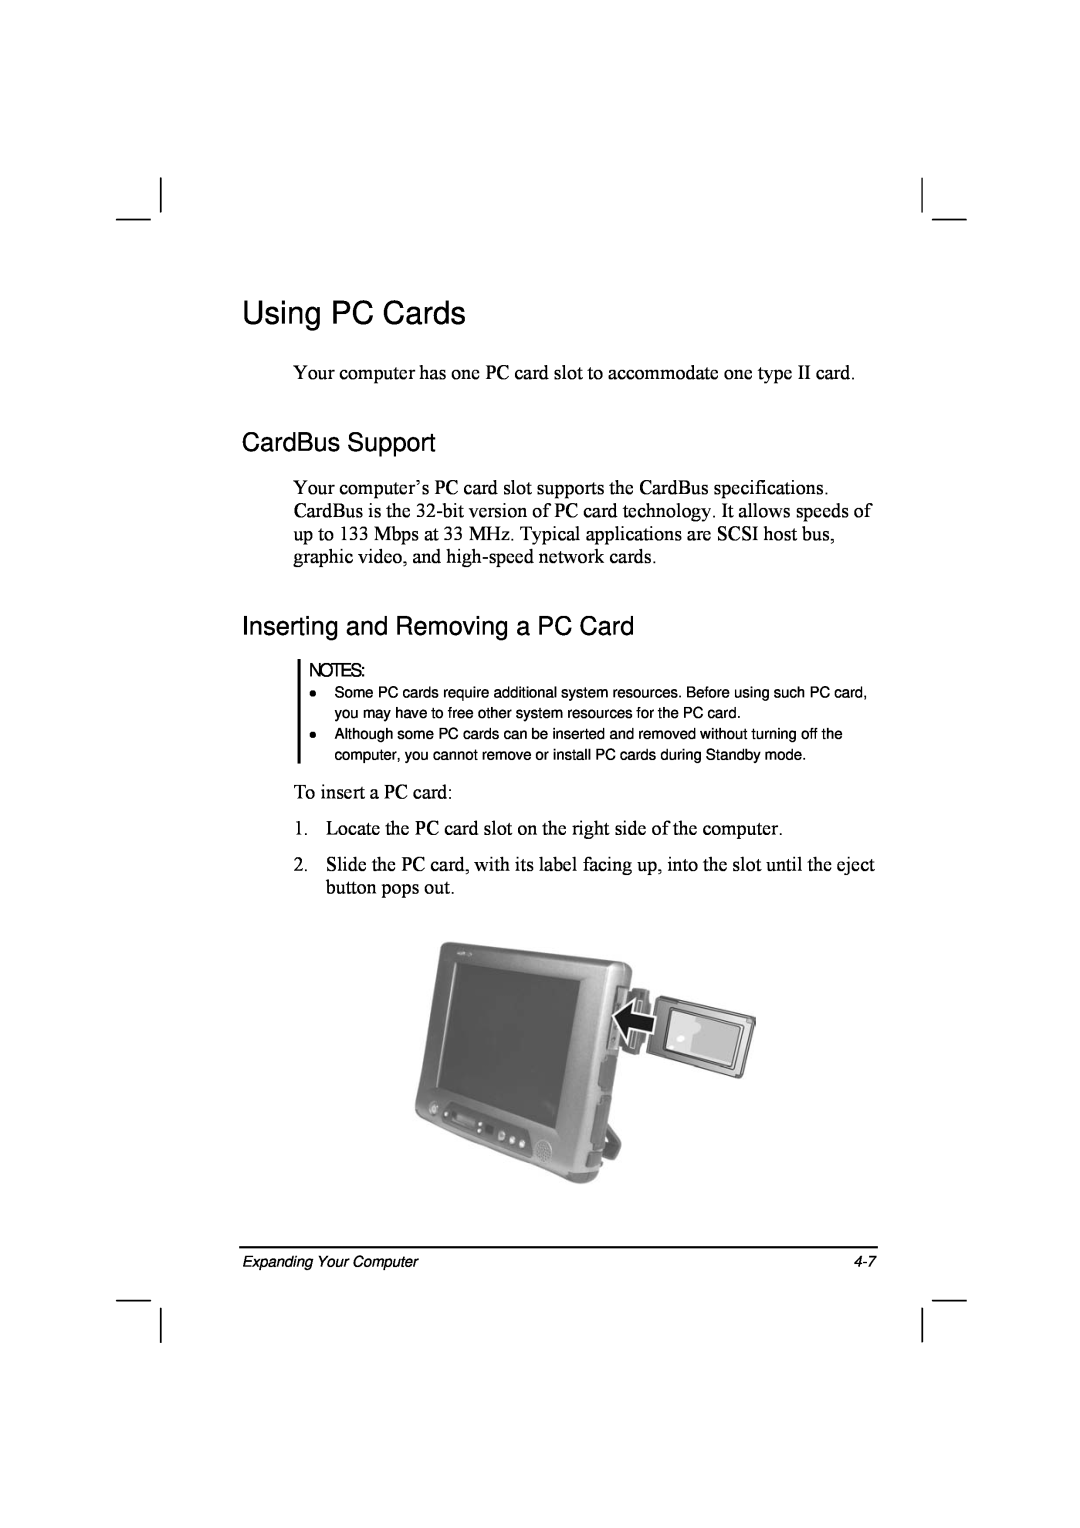 TAG 20 Series manual Using PC Cards, CardBus Support, Inserting and Removing a PC Card 